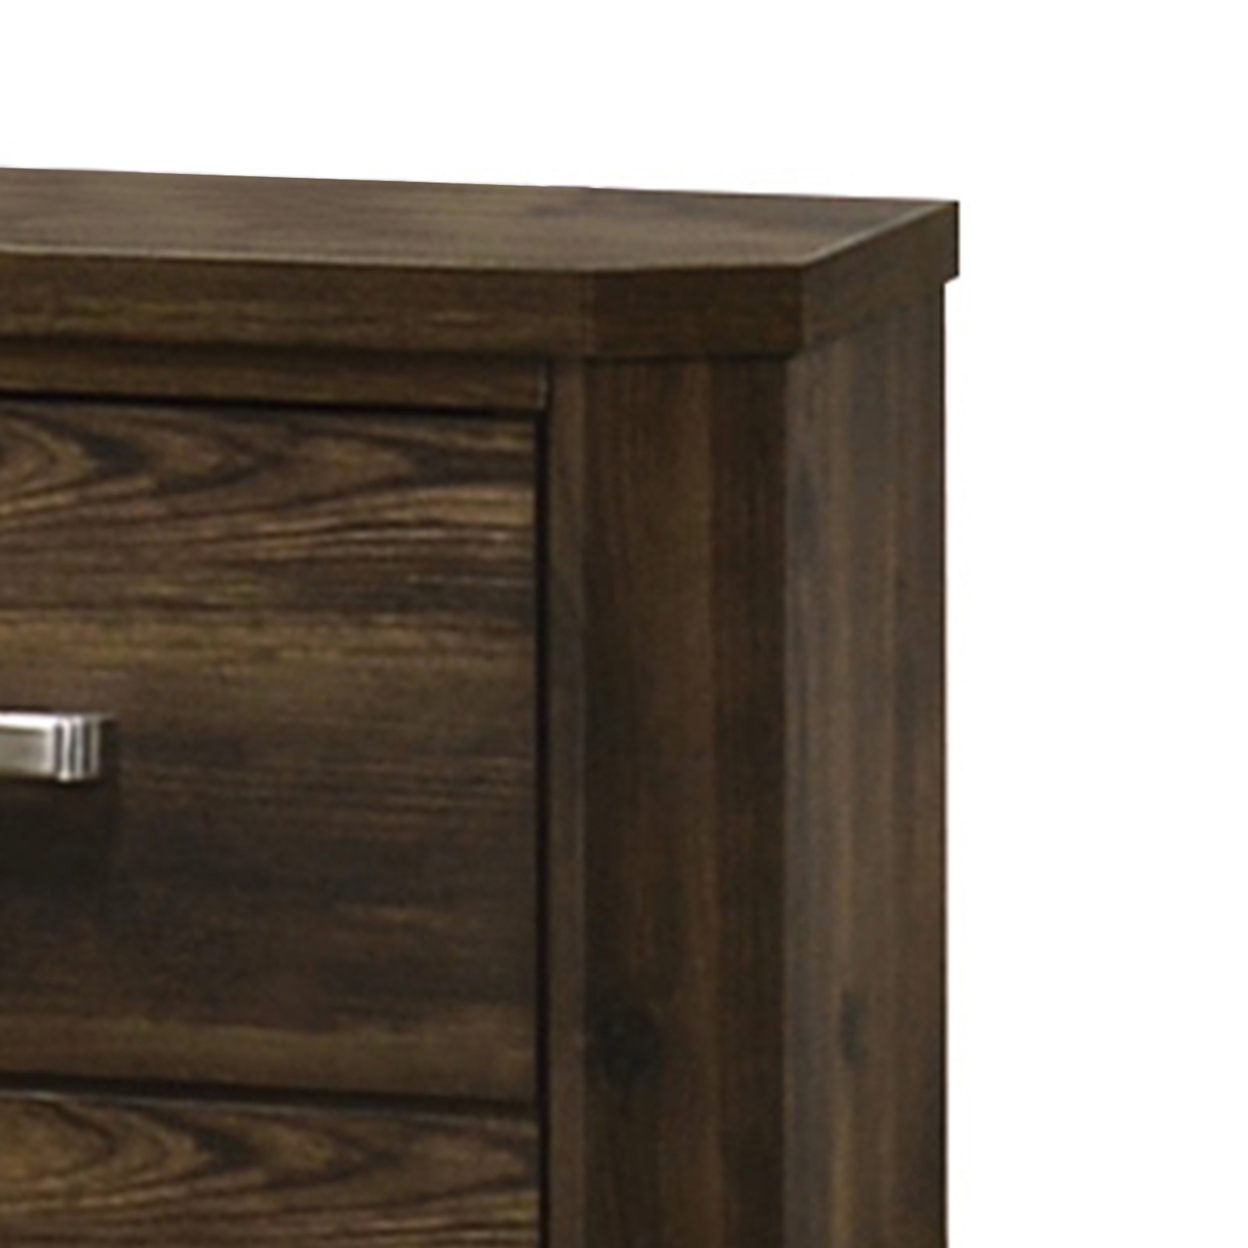 Transitional Style 2 Drawer Wooden Nightstand With Plinth Base, Brown- Saltoro Sherpi